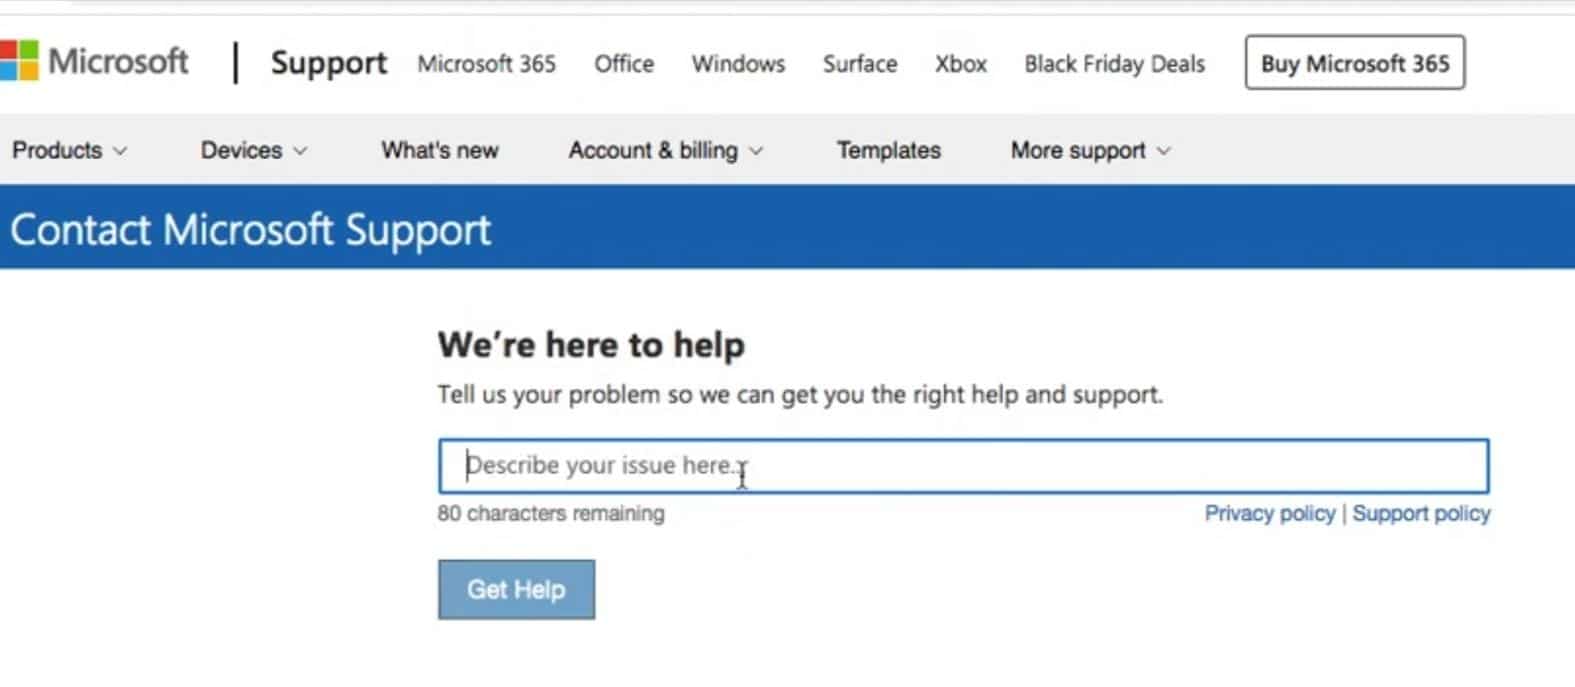 Contact Microsoft support to fix Microsoft Outlook 'Something went wrong' error